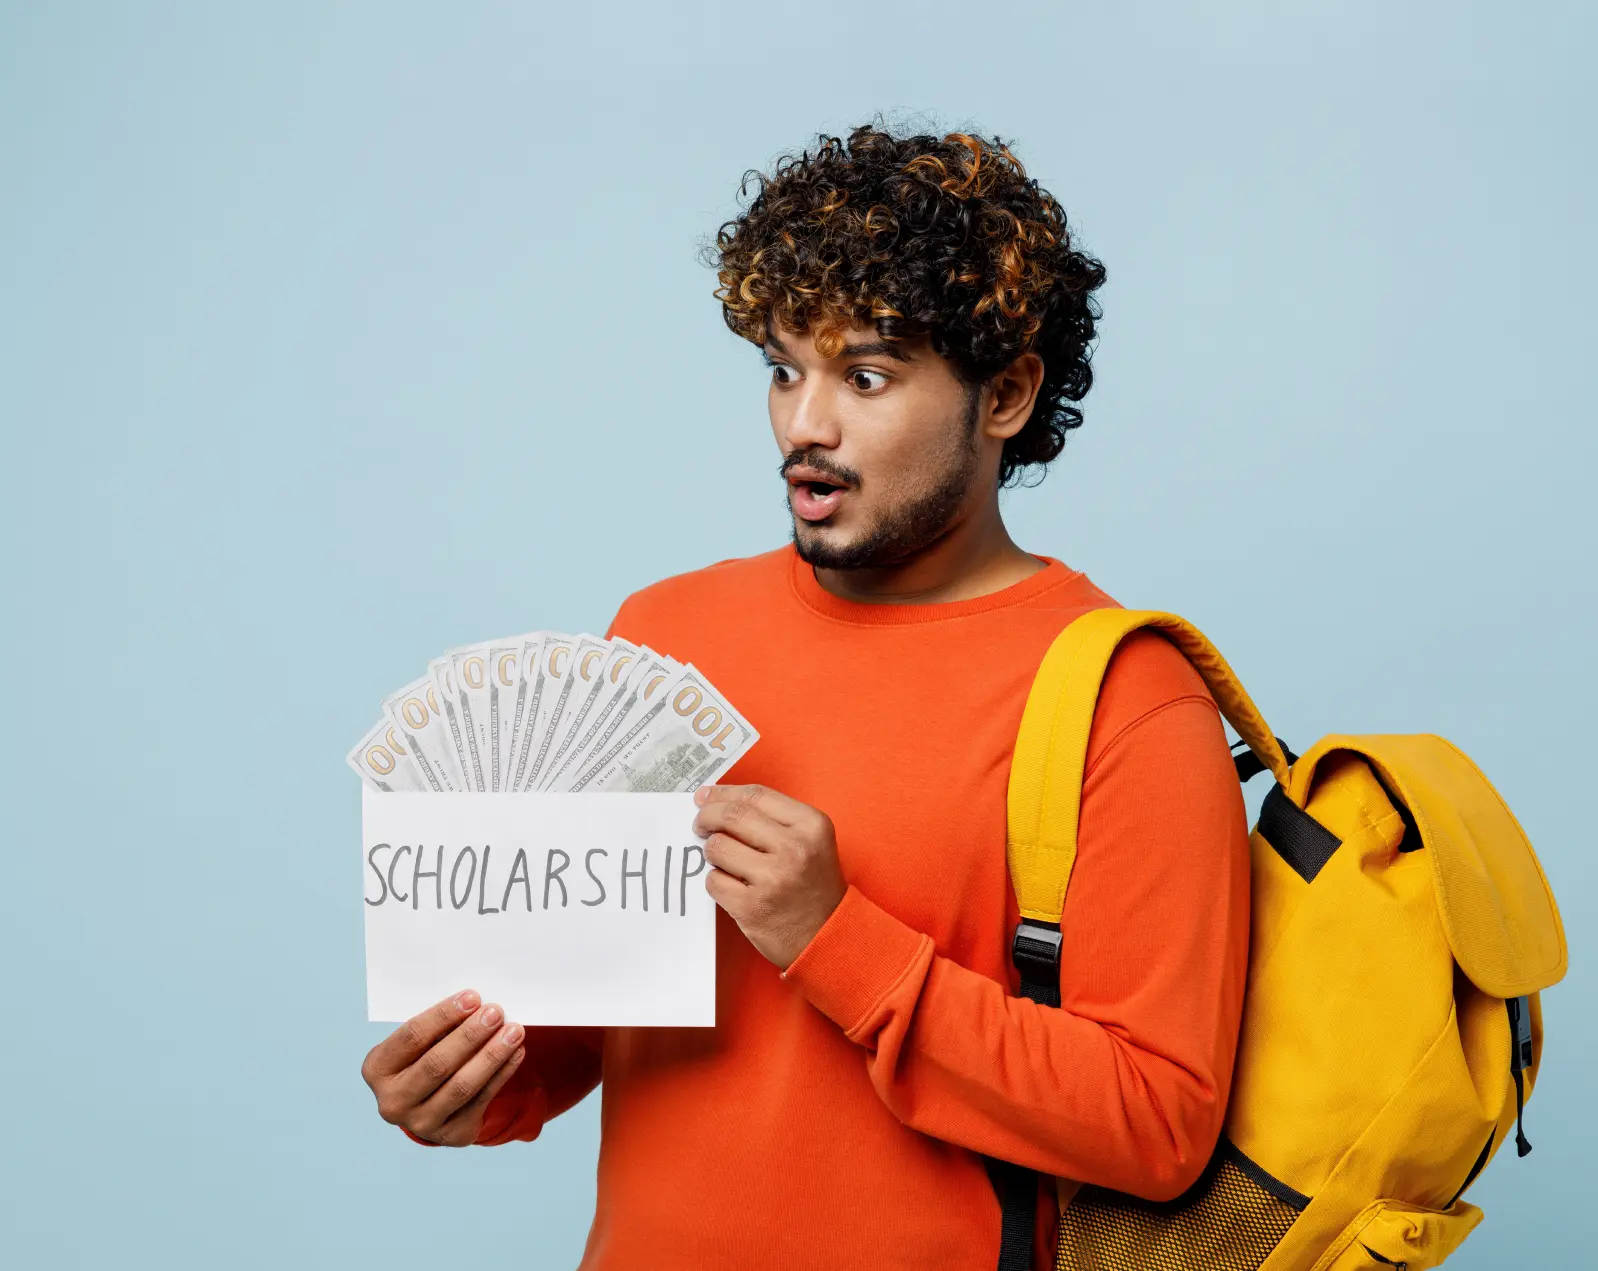 A male student holding scholarship money